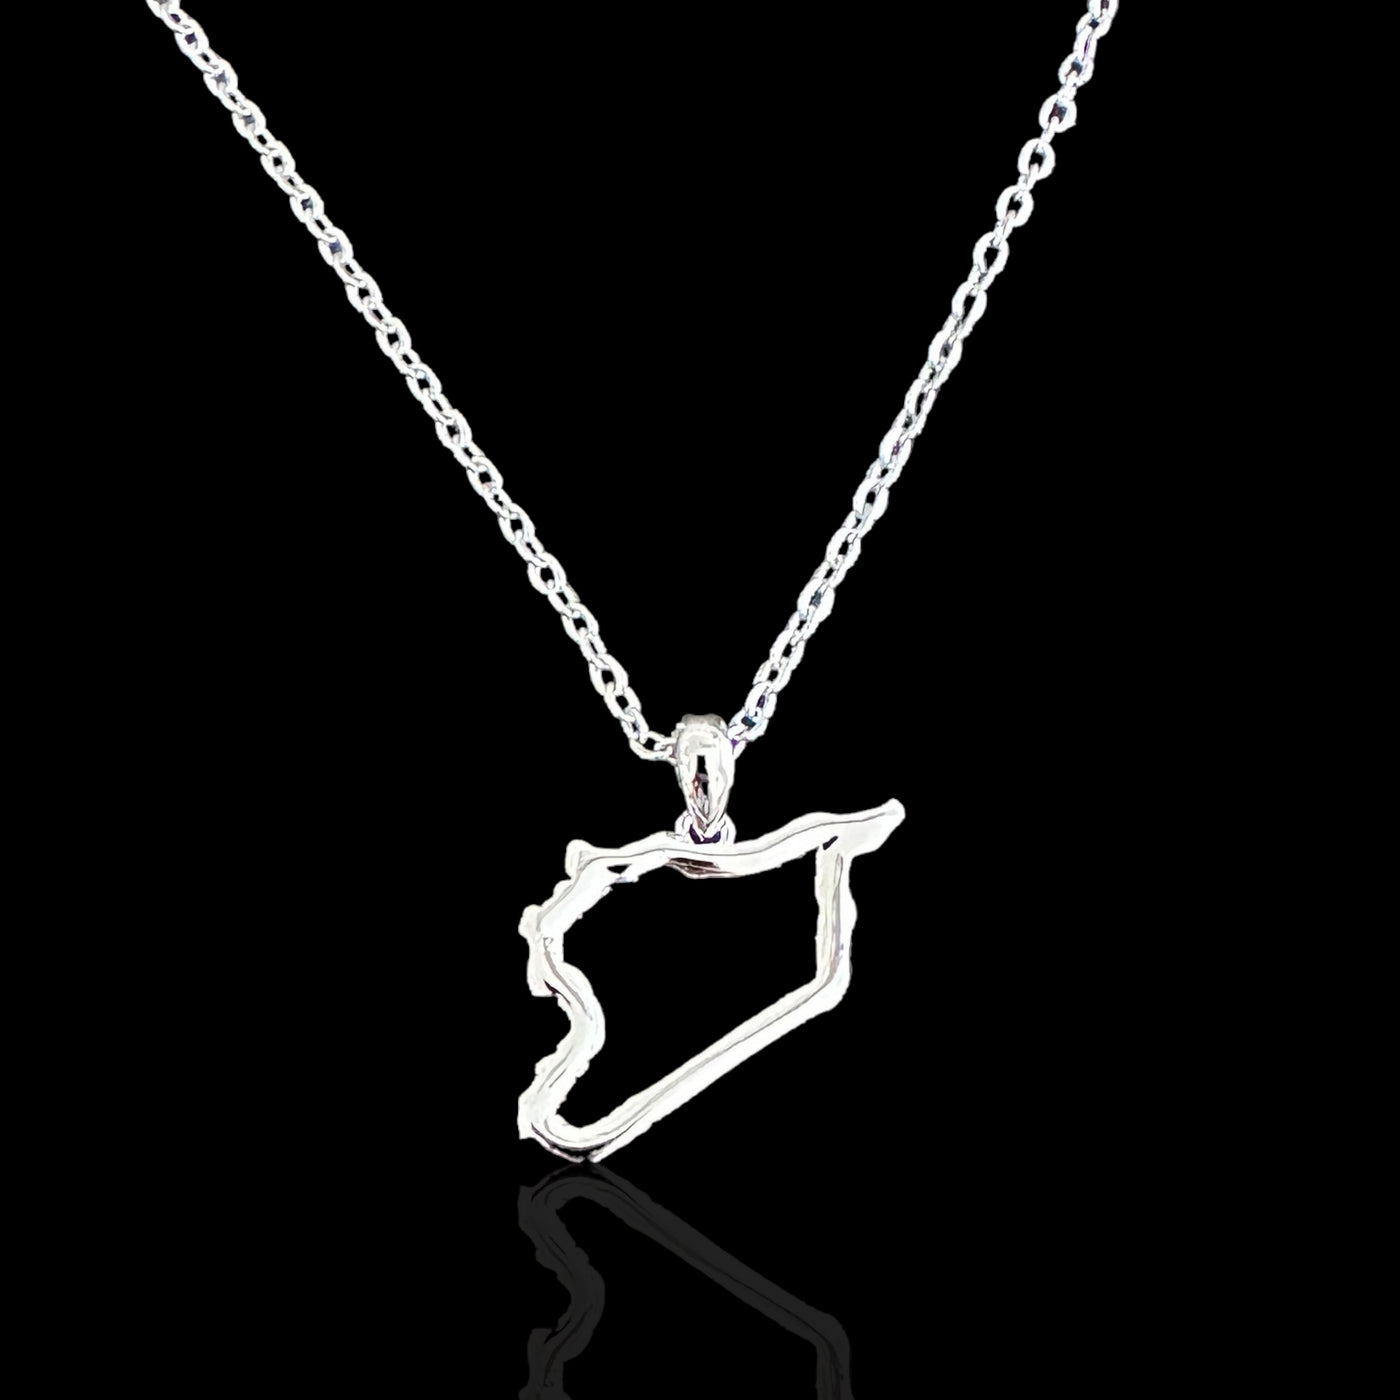 Sterling Silver Syria Map Outline Necklace - Available in 3 Colors